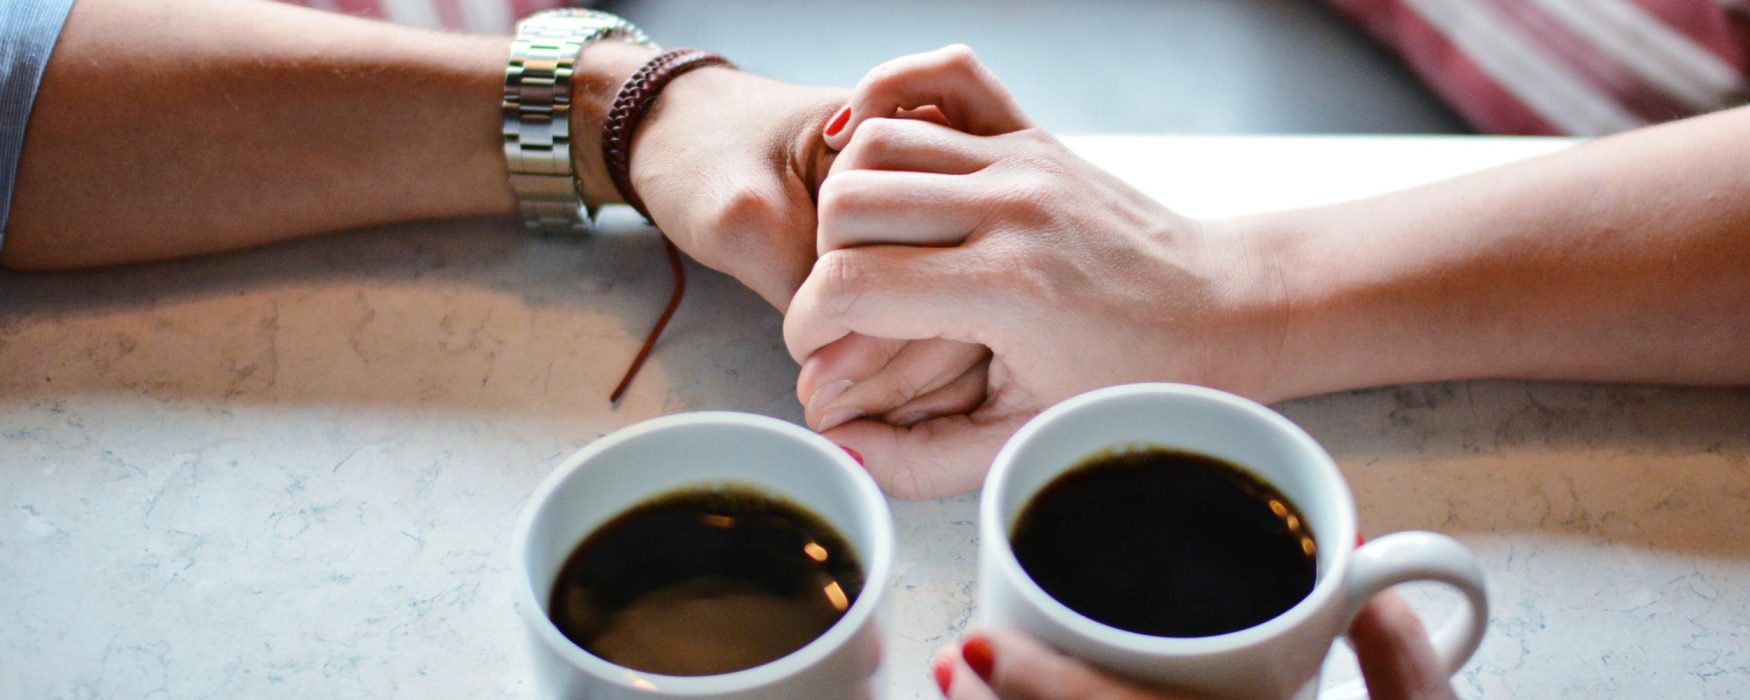 Two people holding hands over a cup of coffee